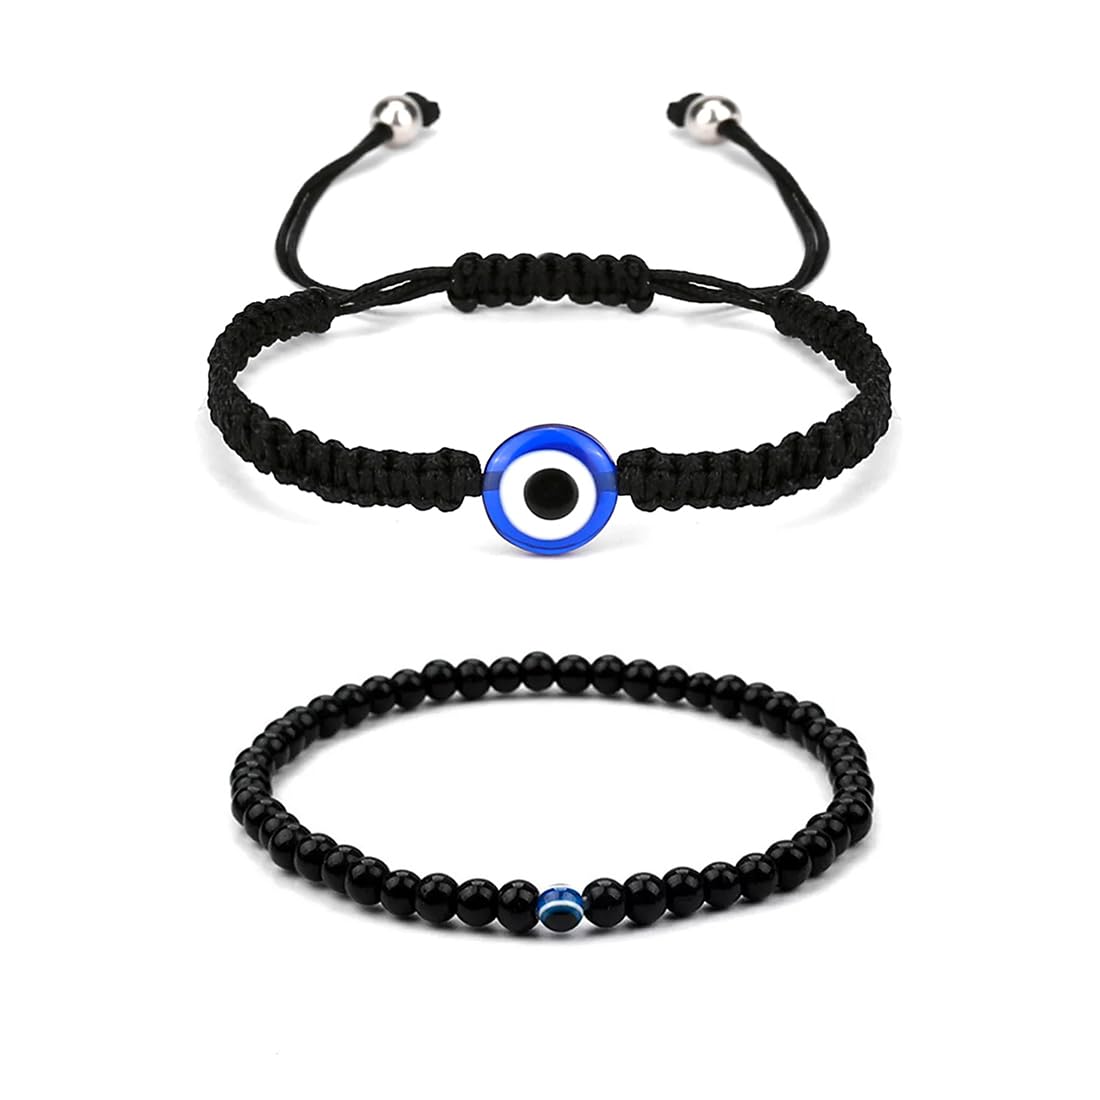 Yellow Chimes Bracelet for Men and Women | 2 Pcs of Black Beads Evil Eye Nazariya Style Bracelets for Boys and Girls | Birthday Gift for Girls and Women Anniversary Gift for Wife and Husband